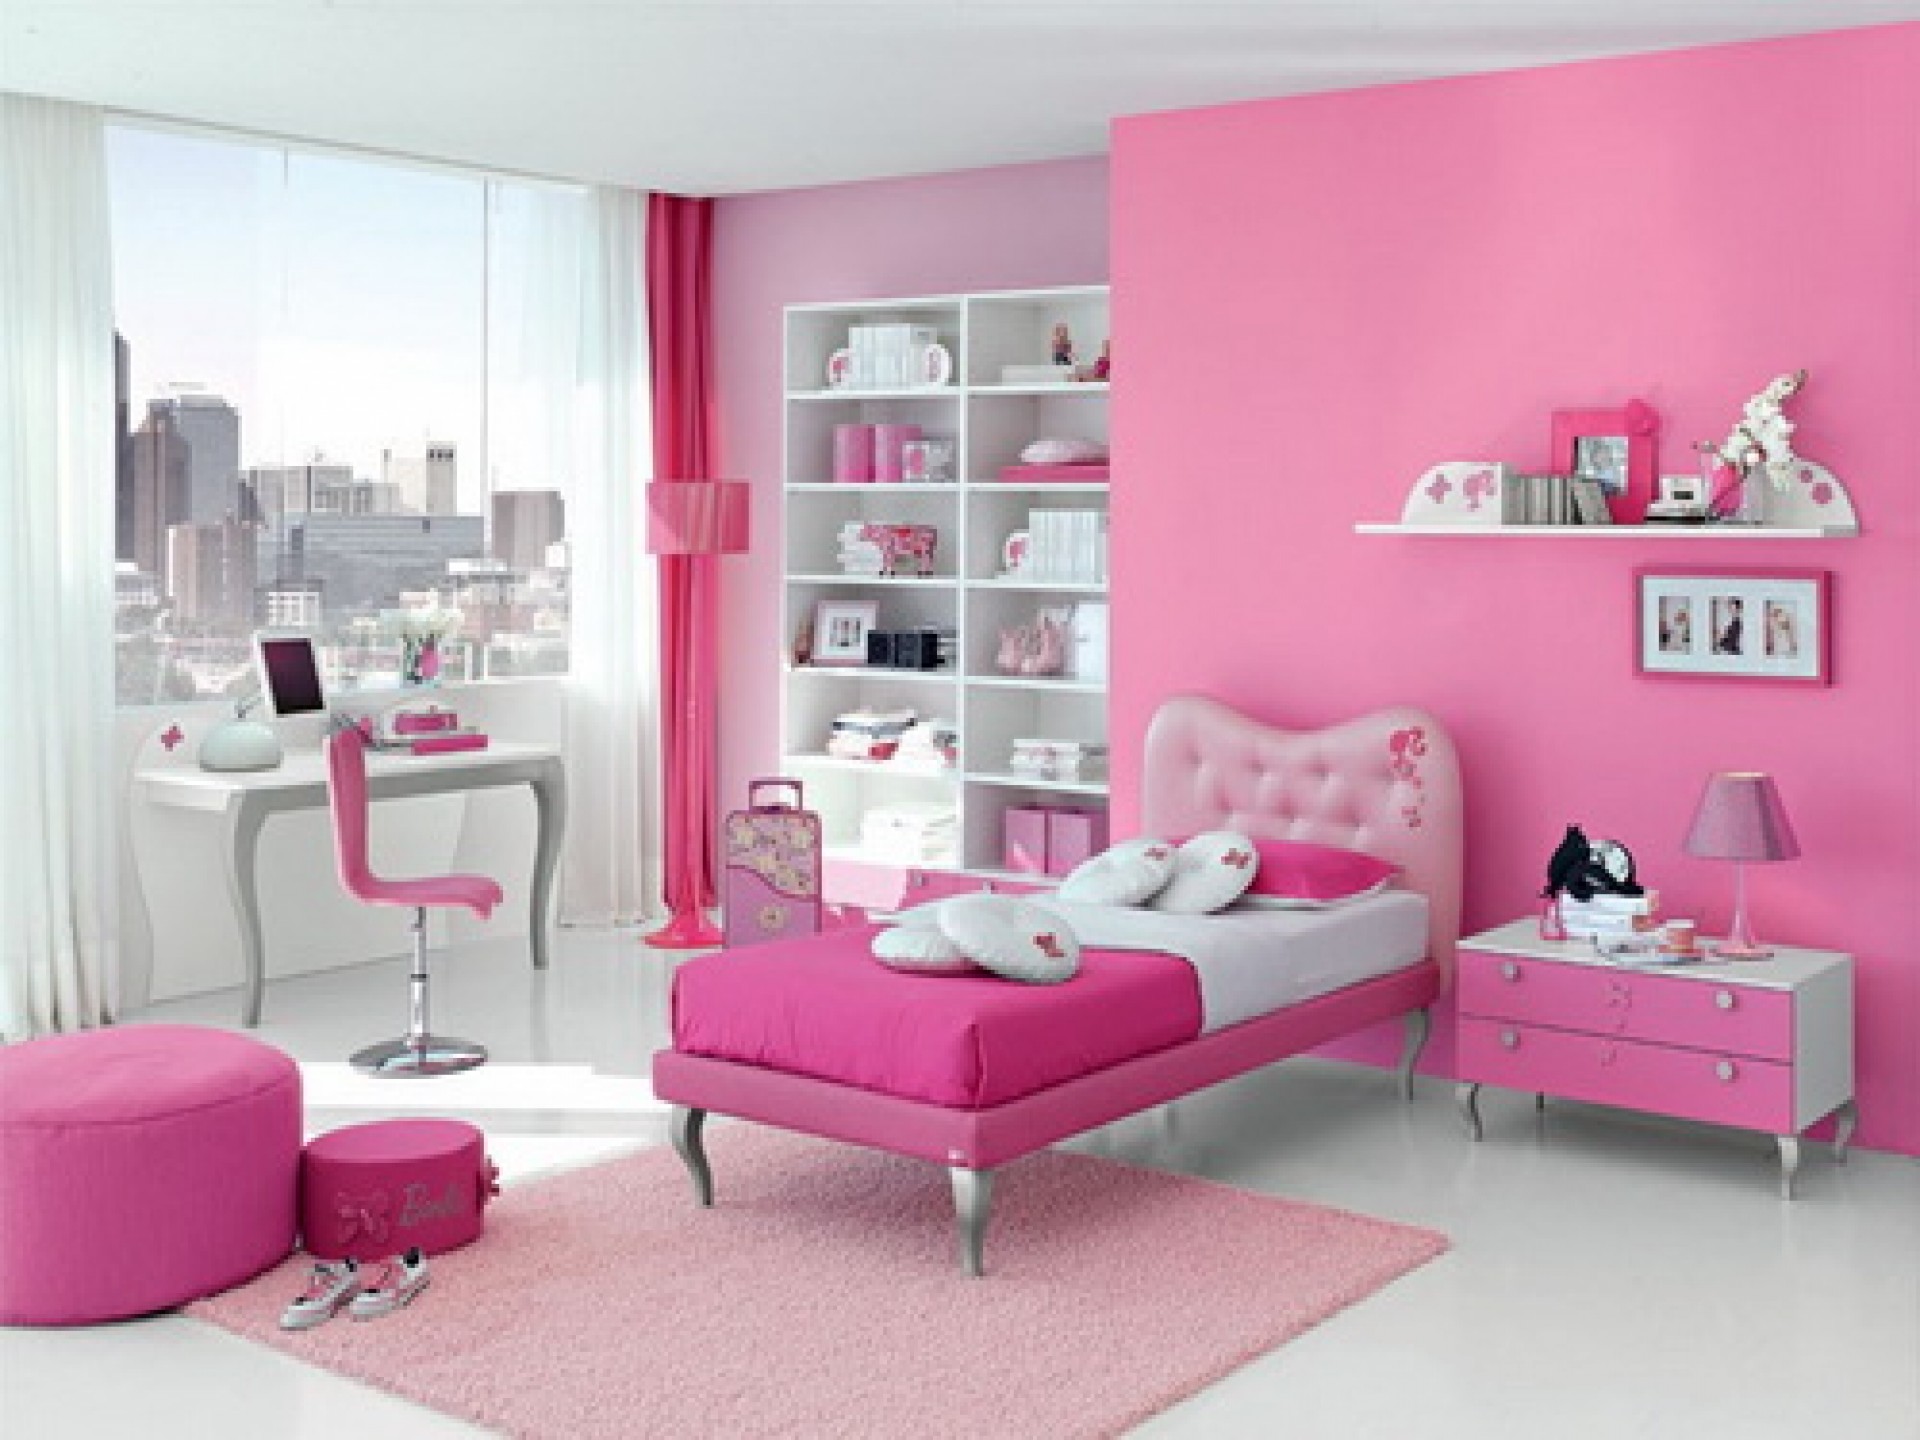 wallpaper for adults bedroom,furniture,pink,room,bedroom,product